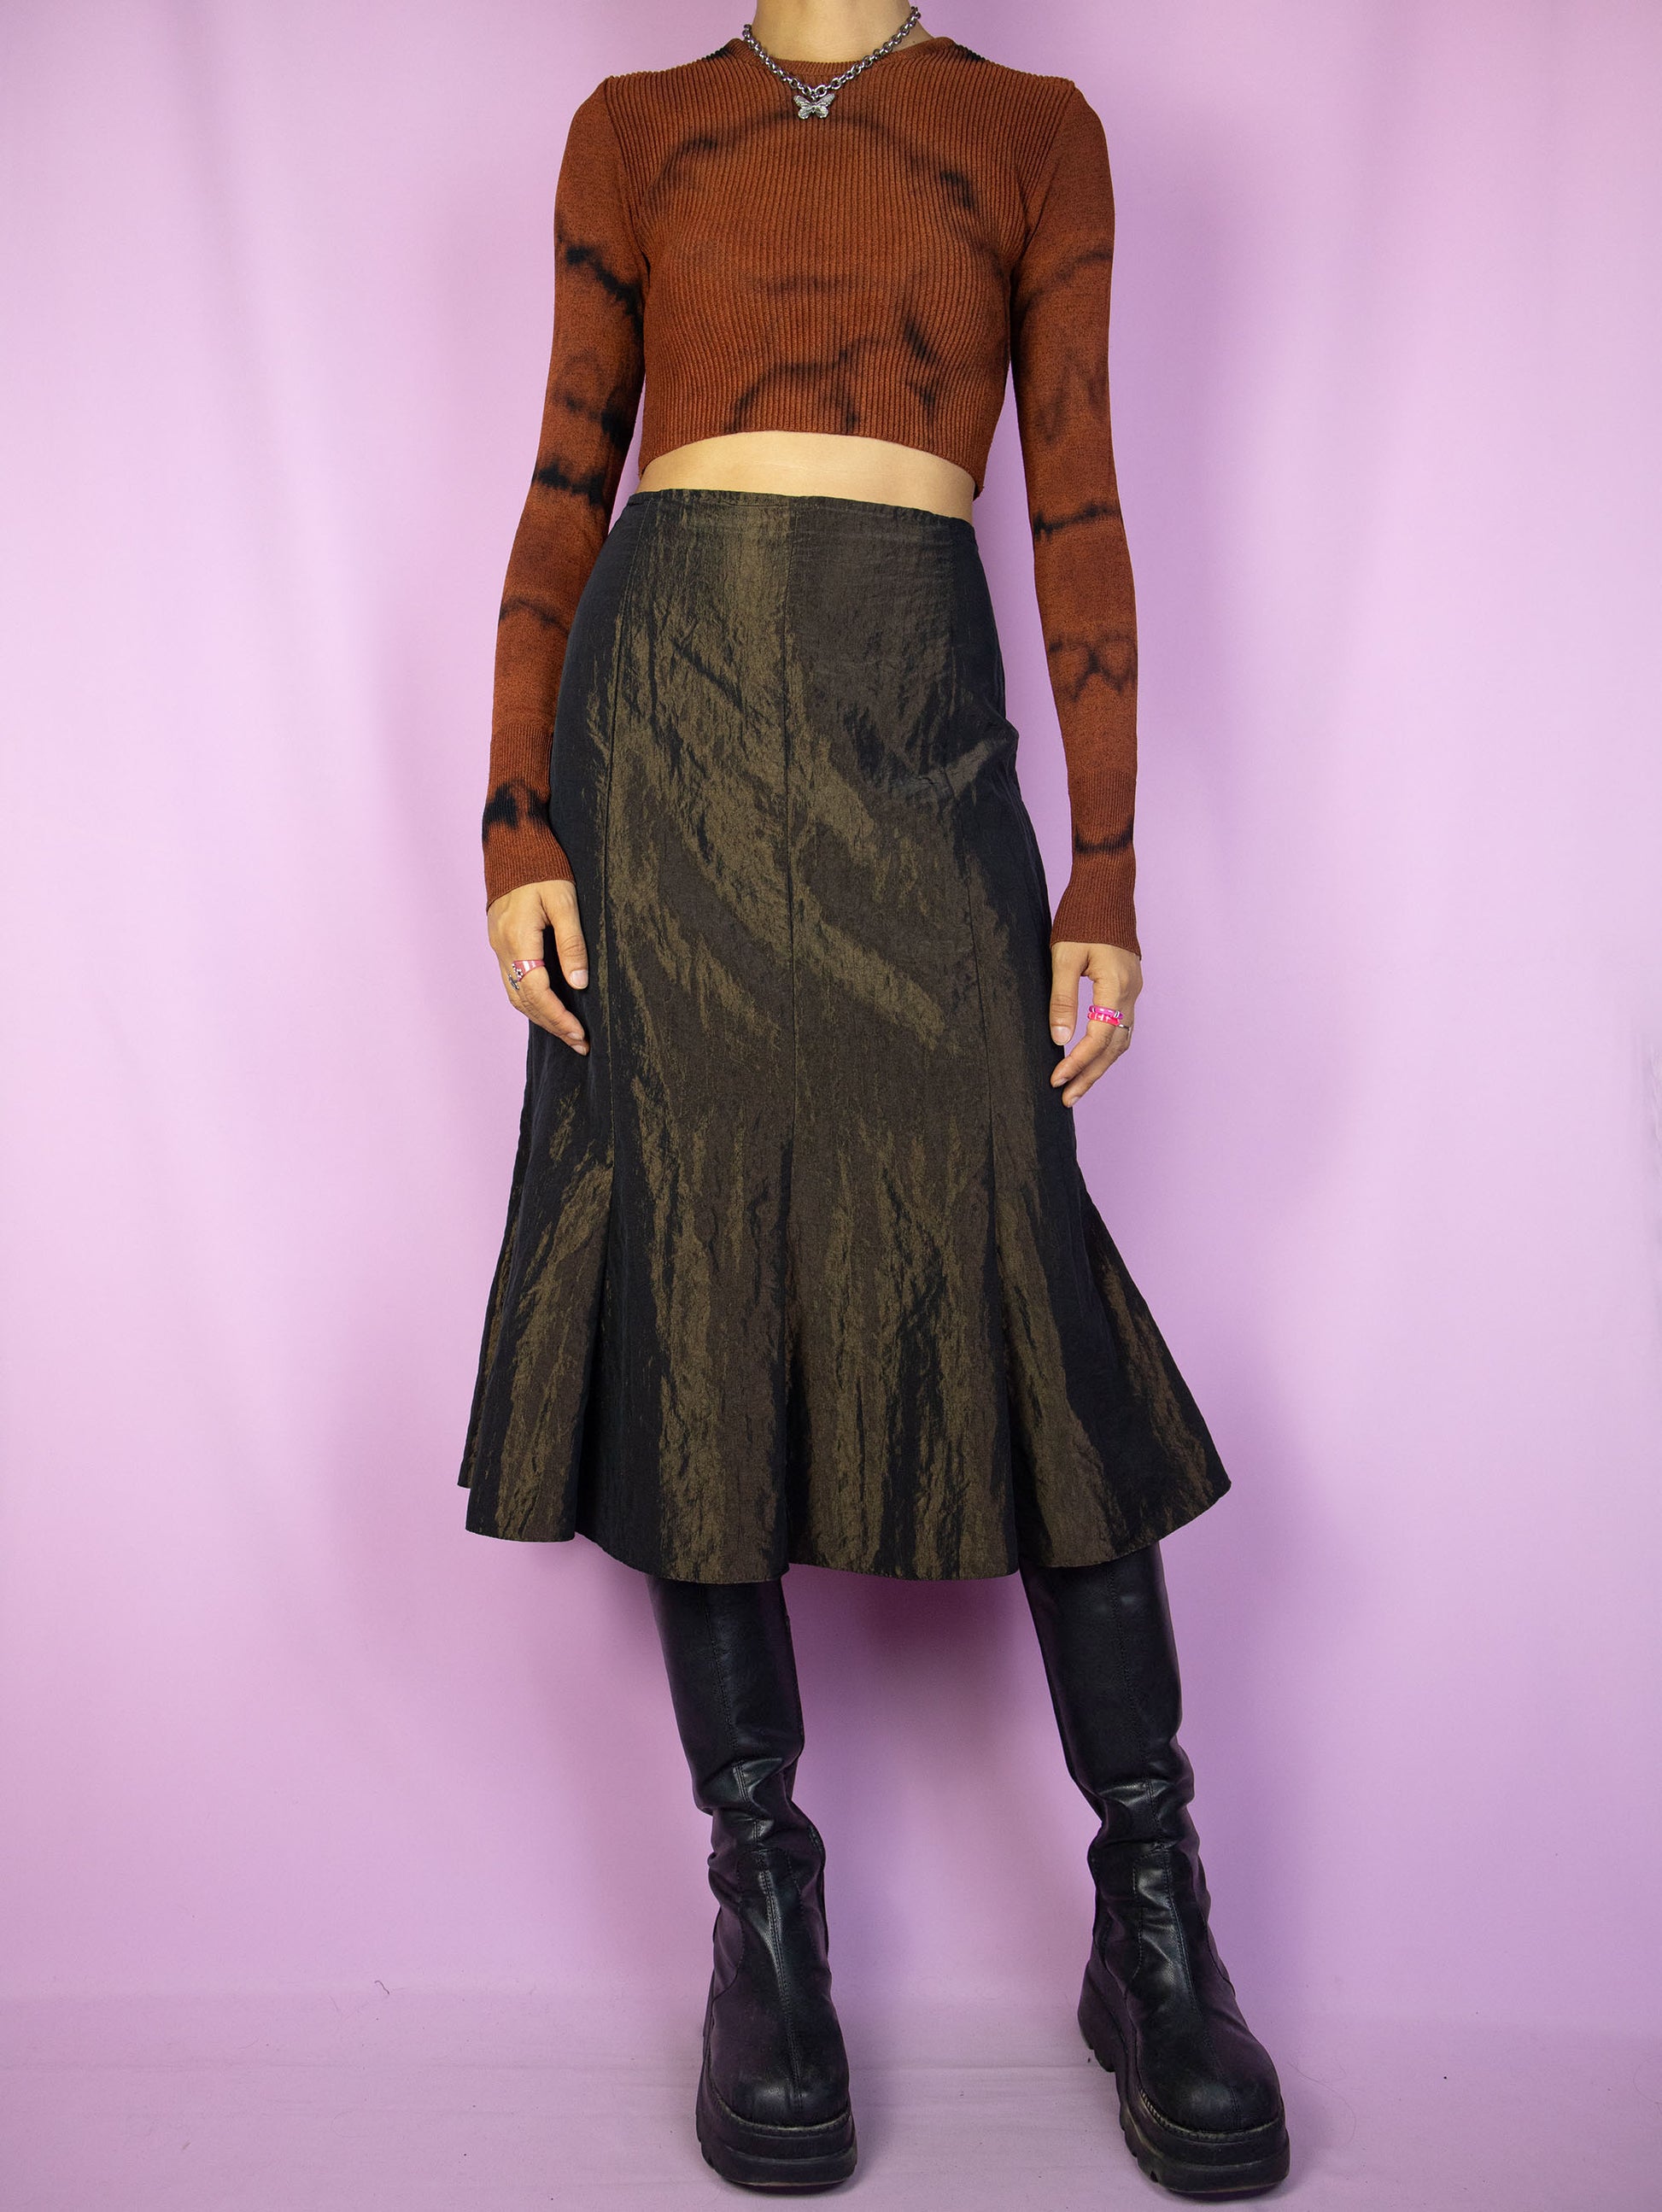 The Vintage 90s Brown Trumpet Midi Skirt is a dark iridescent mermaid skirt with a back zipper closure. Elegant fairy grunge whimsygoth style 1990s evening party maxi skirt. Excellent vintage condition.